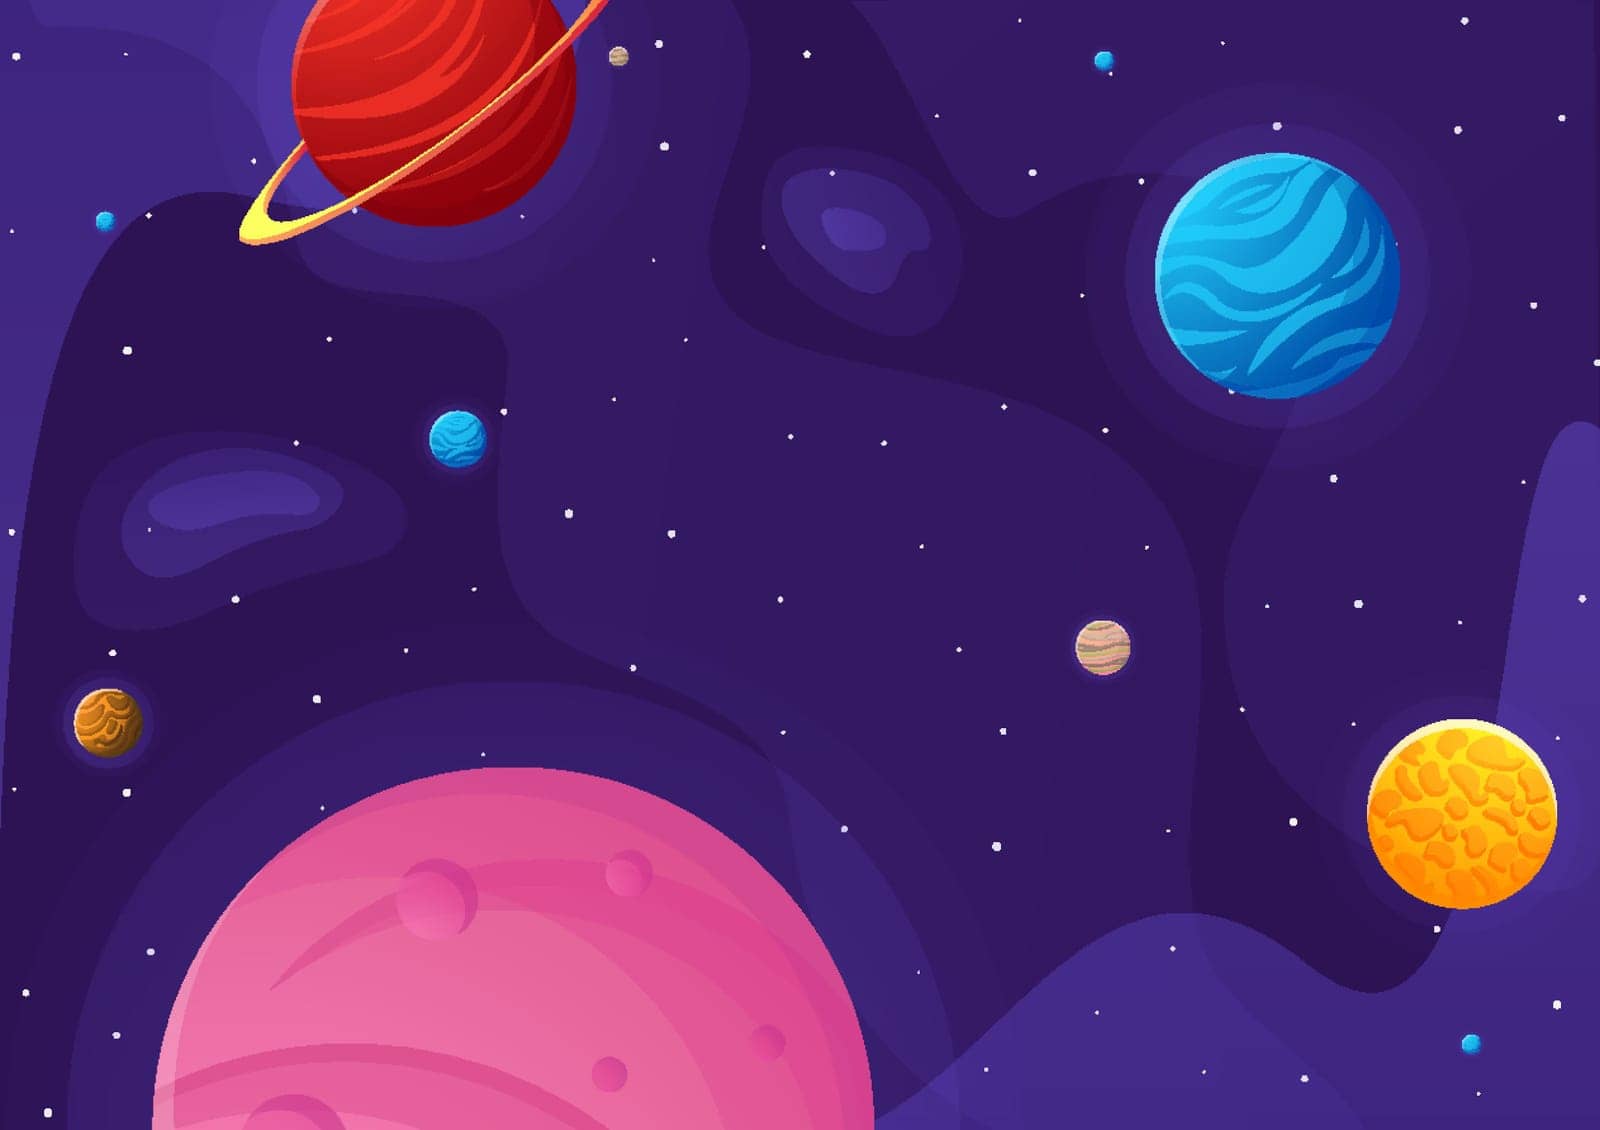 Space cartoon background. Cute design for landing page, banner or wallpaper. Planets and stars in the open space. Childish galaxy scene. Space cartoon vector illustration.